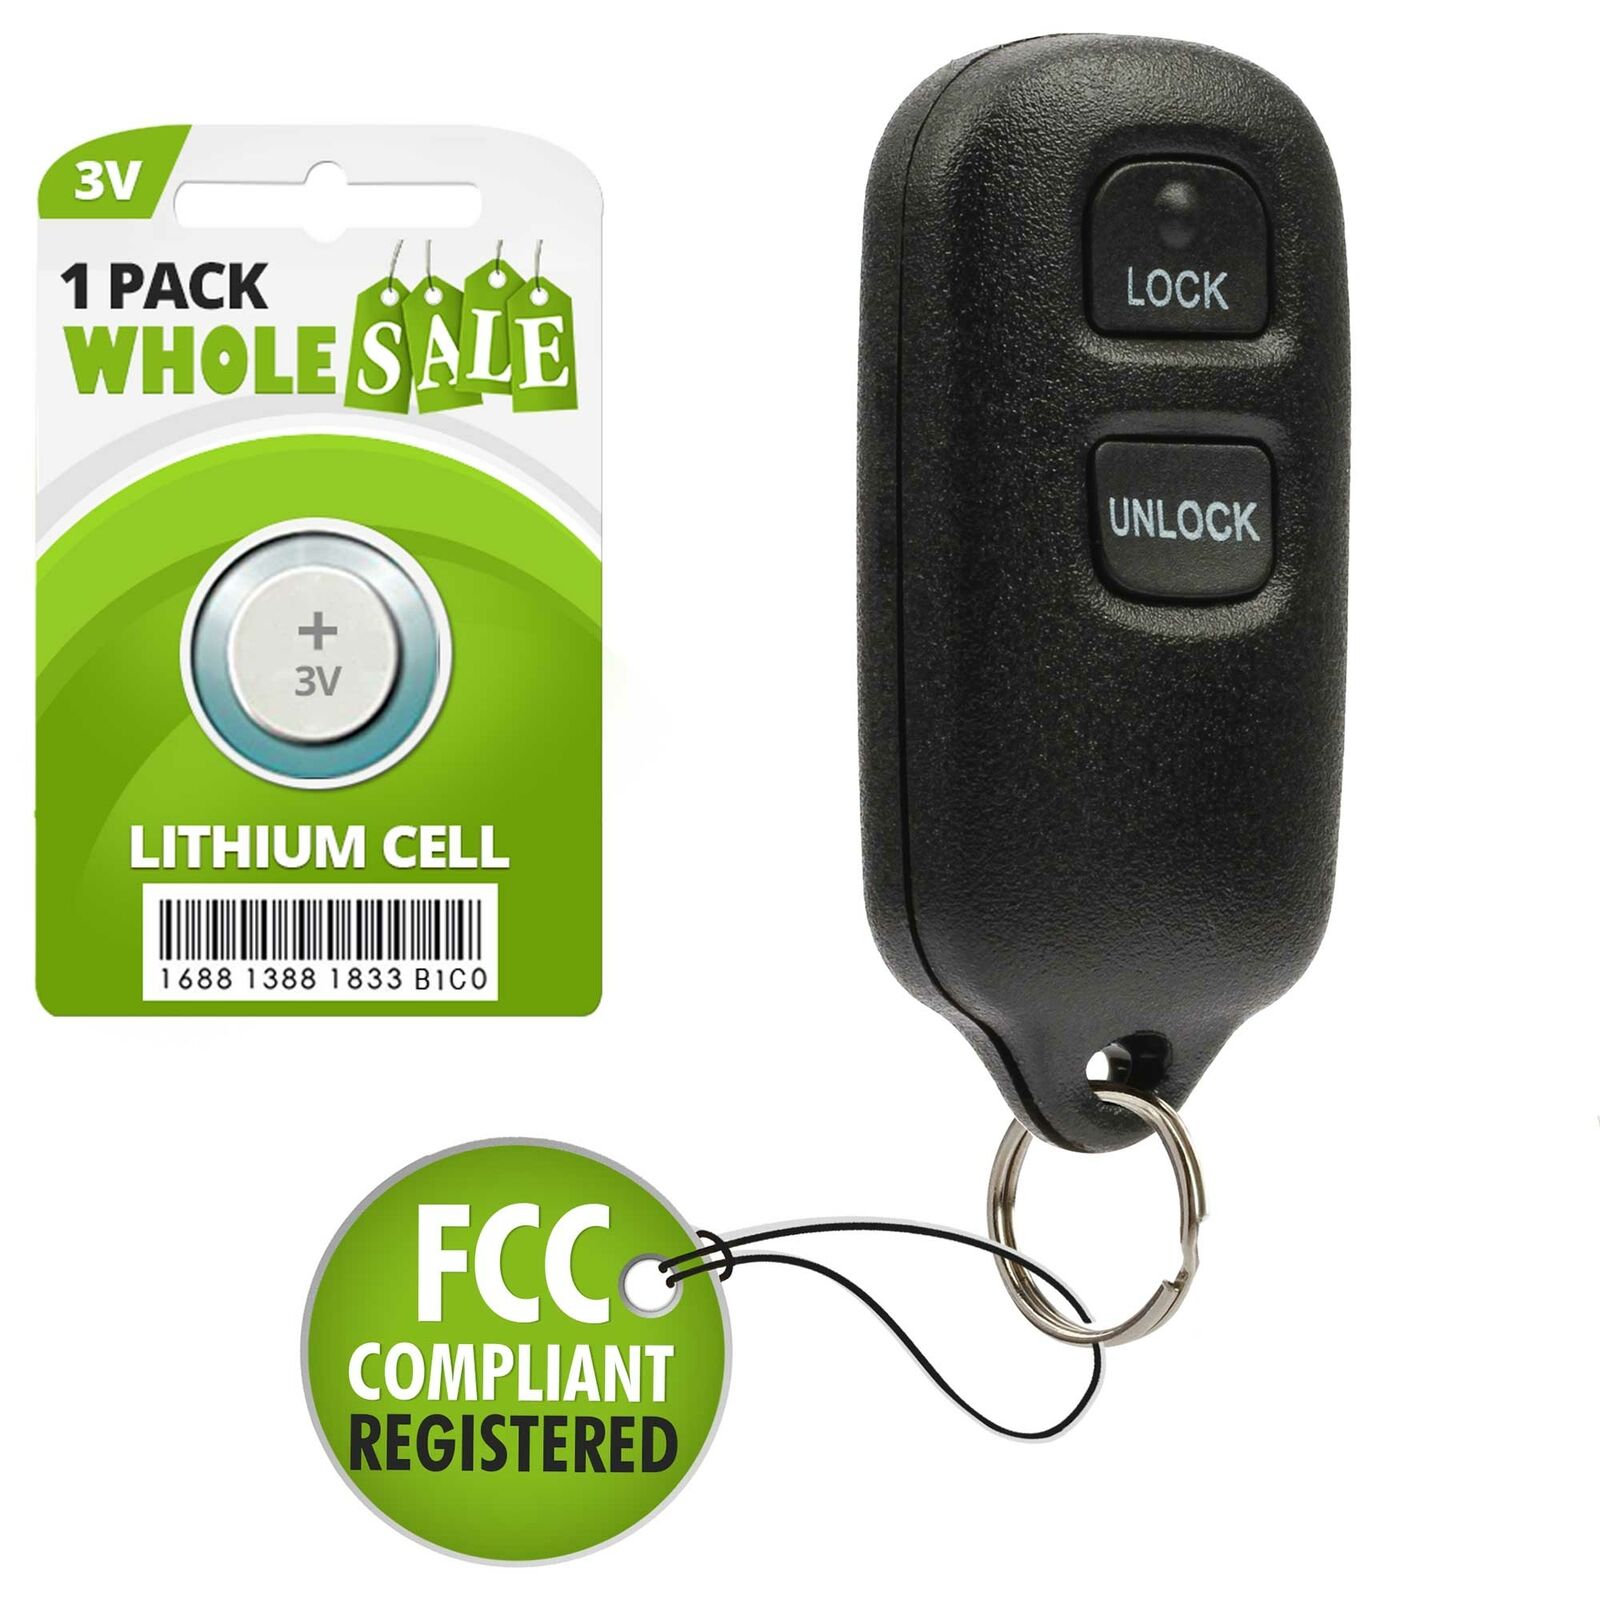 Replacement For 1998 1999 2000 2001 2002 2003 2004 Toyota Corolla Key Fob Alarm